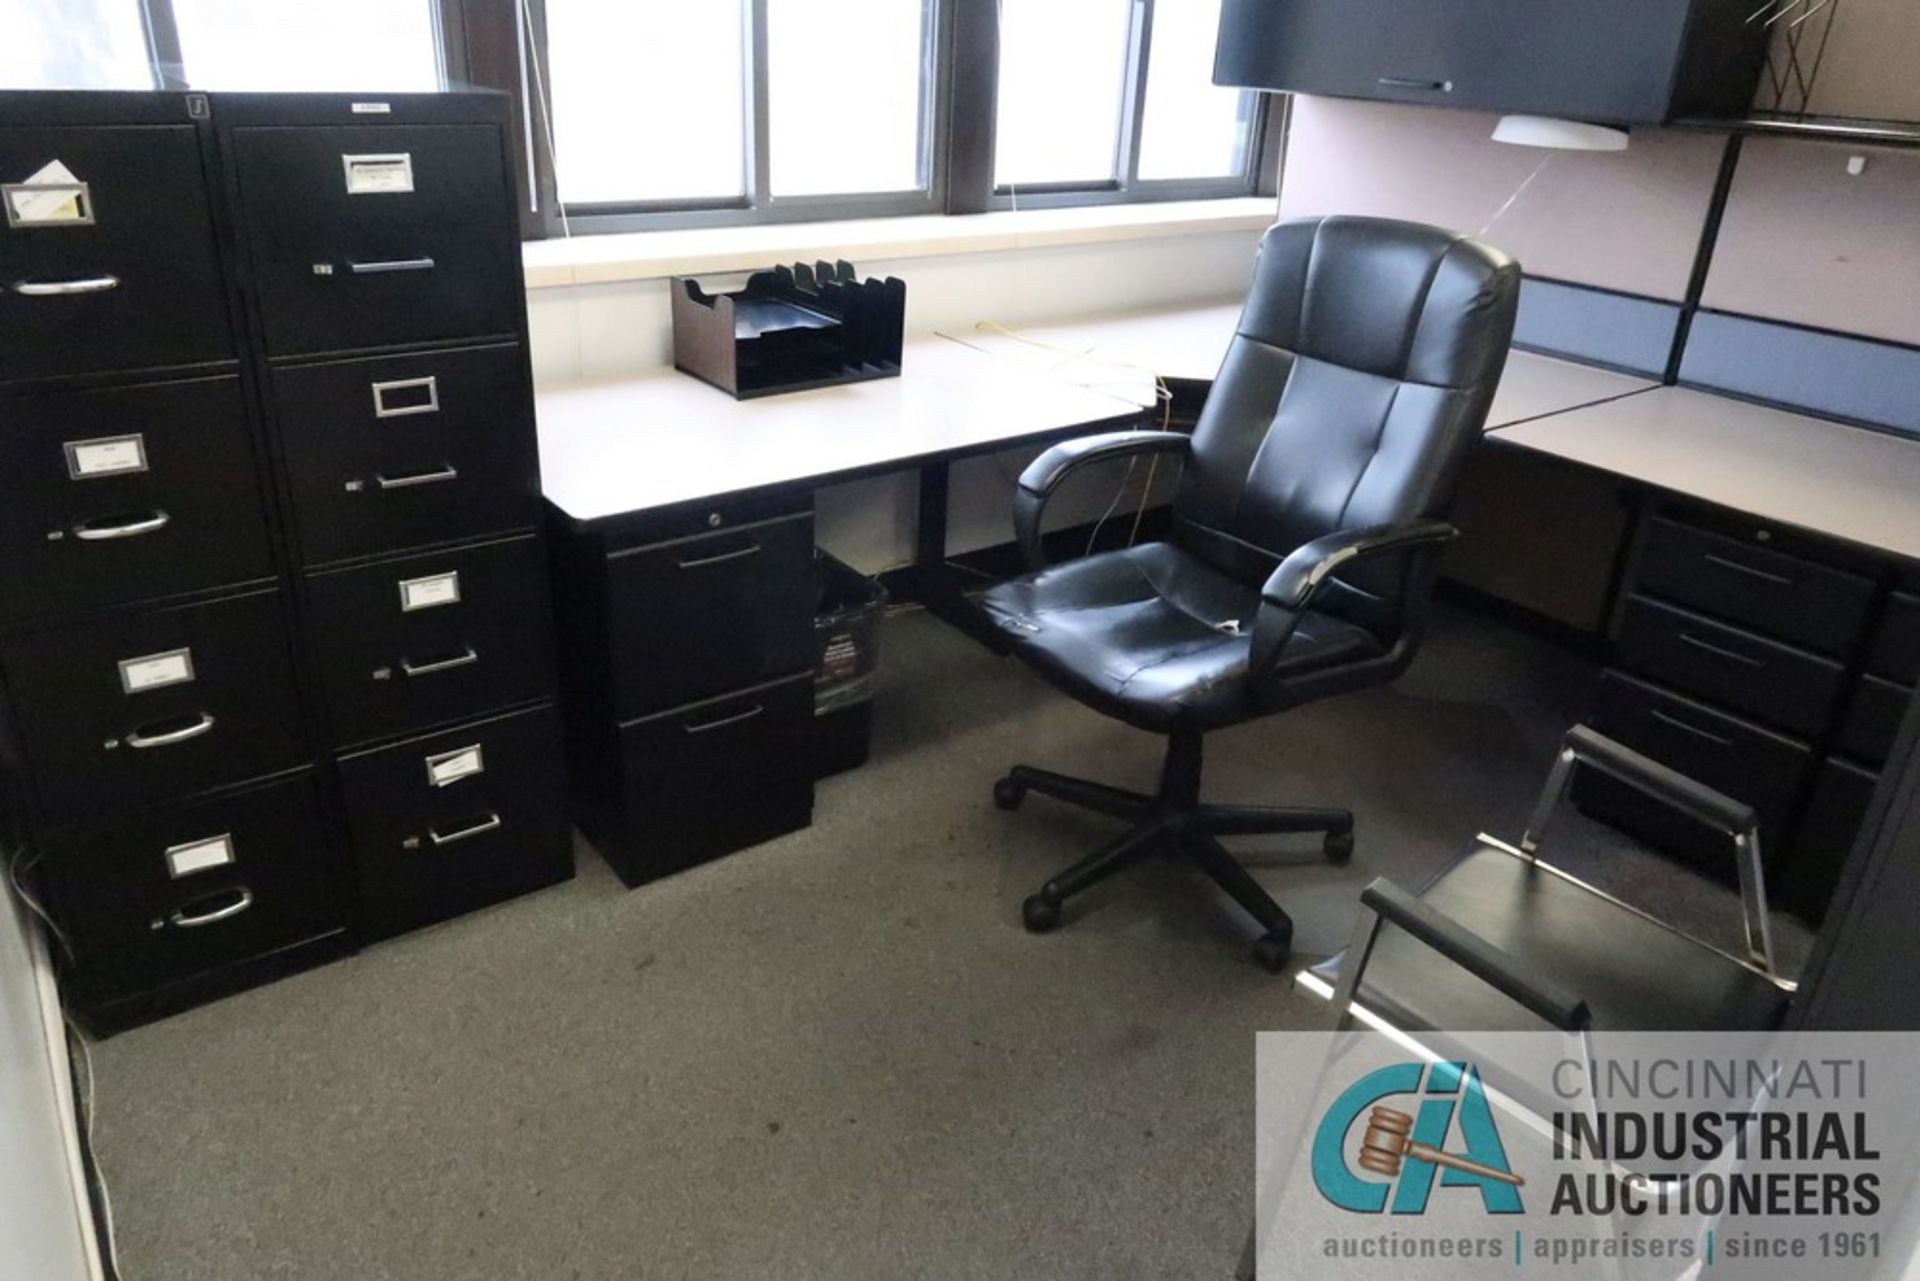 (LOT) (4) CUBICLES, 96" X 96" L-SHAPED DESKS, (4) EXECUTIVE CHAIRS, (3) SIDE CHAIRS, FILE CABINETS - Image 2 of 6